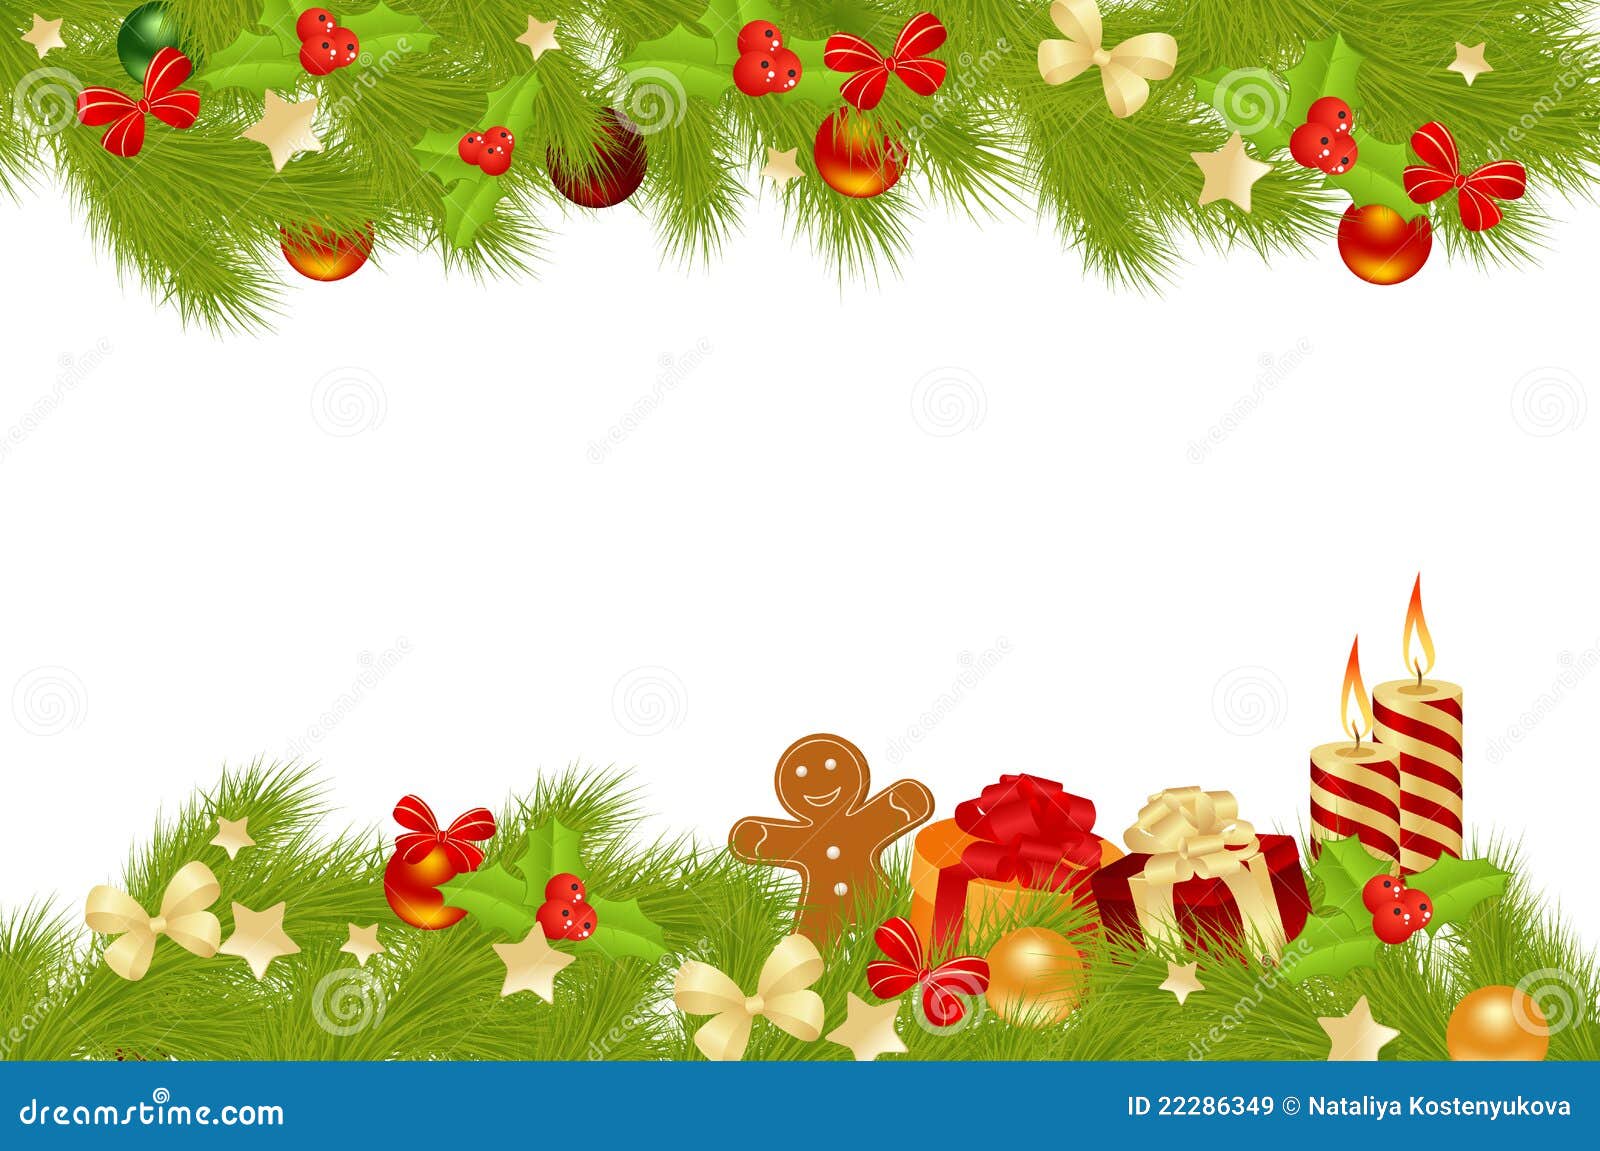 Christmas Card Background. Royalty Free Stock Images 